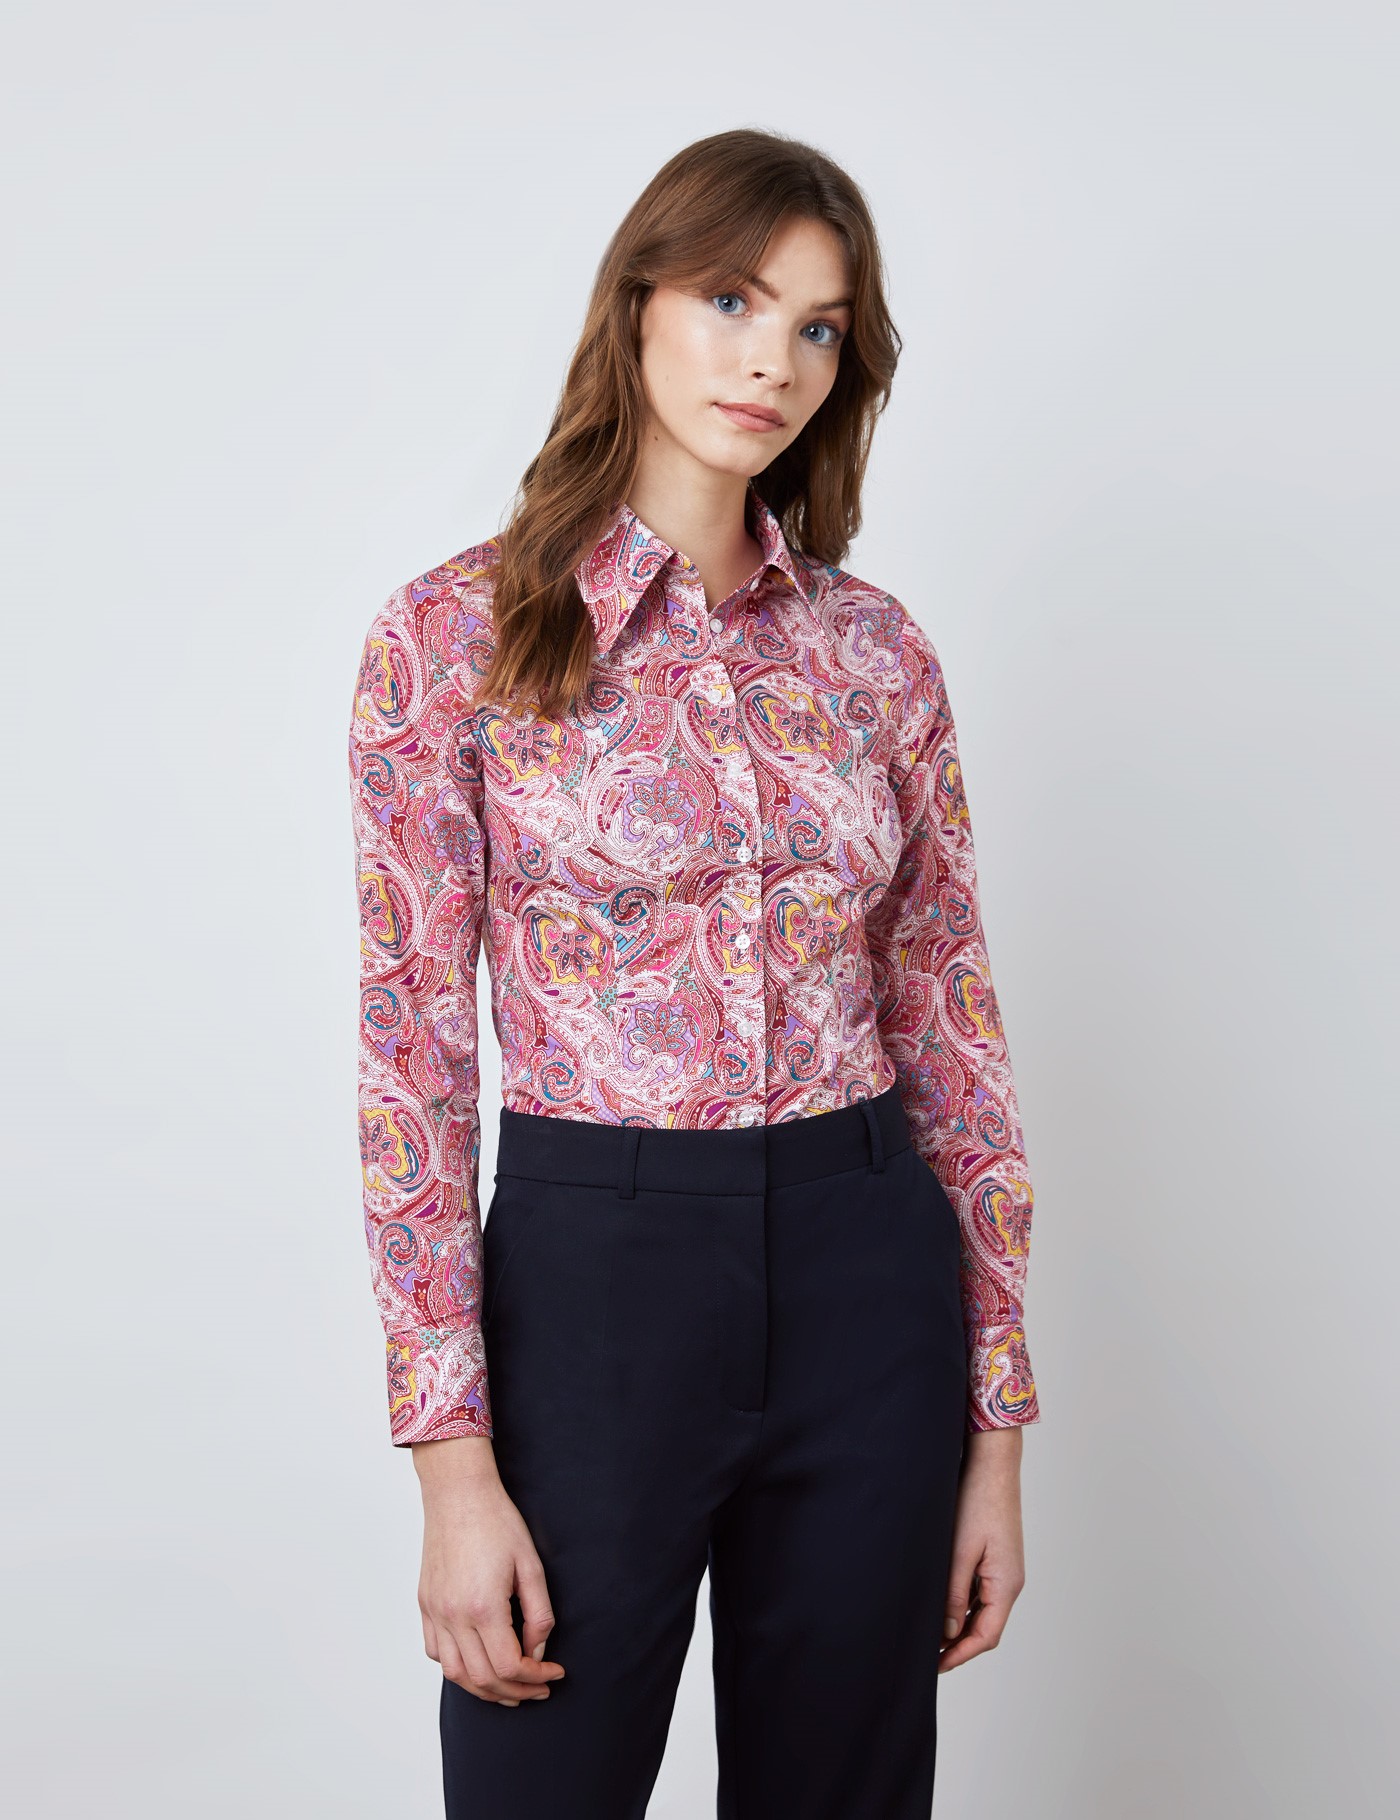 Cotton Women's Paisley Print Fitted Shirt with Vintage Collar in Wine ...